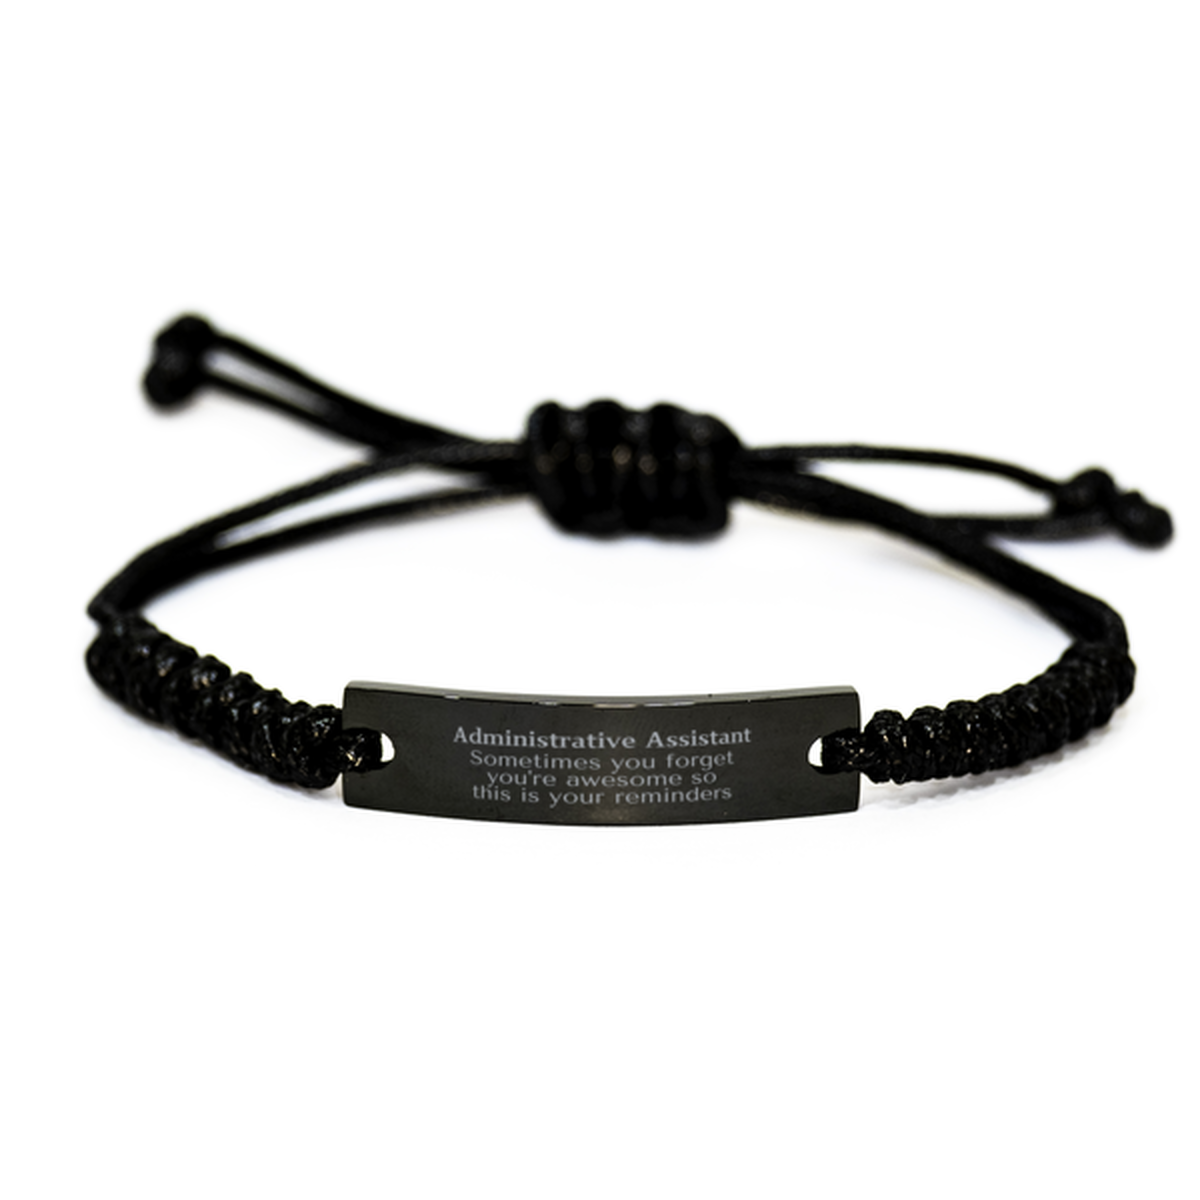 Sentimental Administrative Assistant Black Rope Bracelet, Administrative Assistant Sometimes you forget you're awesome so this is your reminders, Graduation Christmas Birthday Gifts for Administrative Assistant, Men, Women, Coworkers